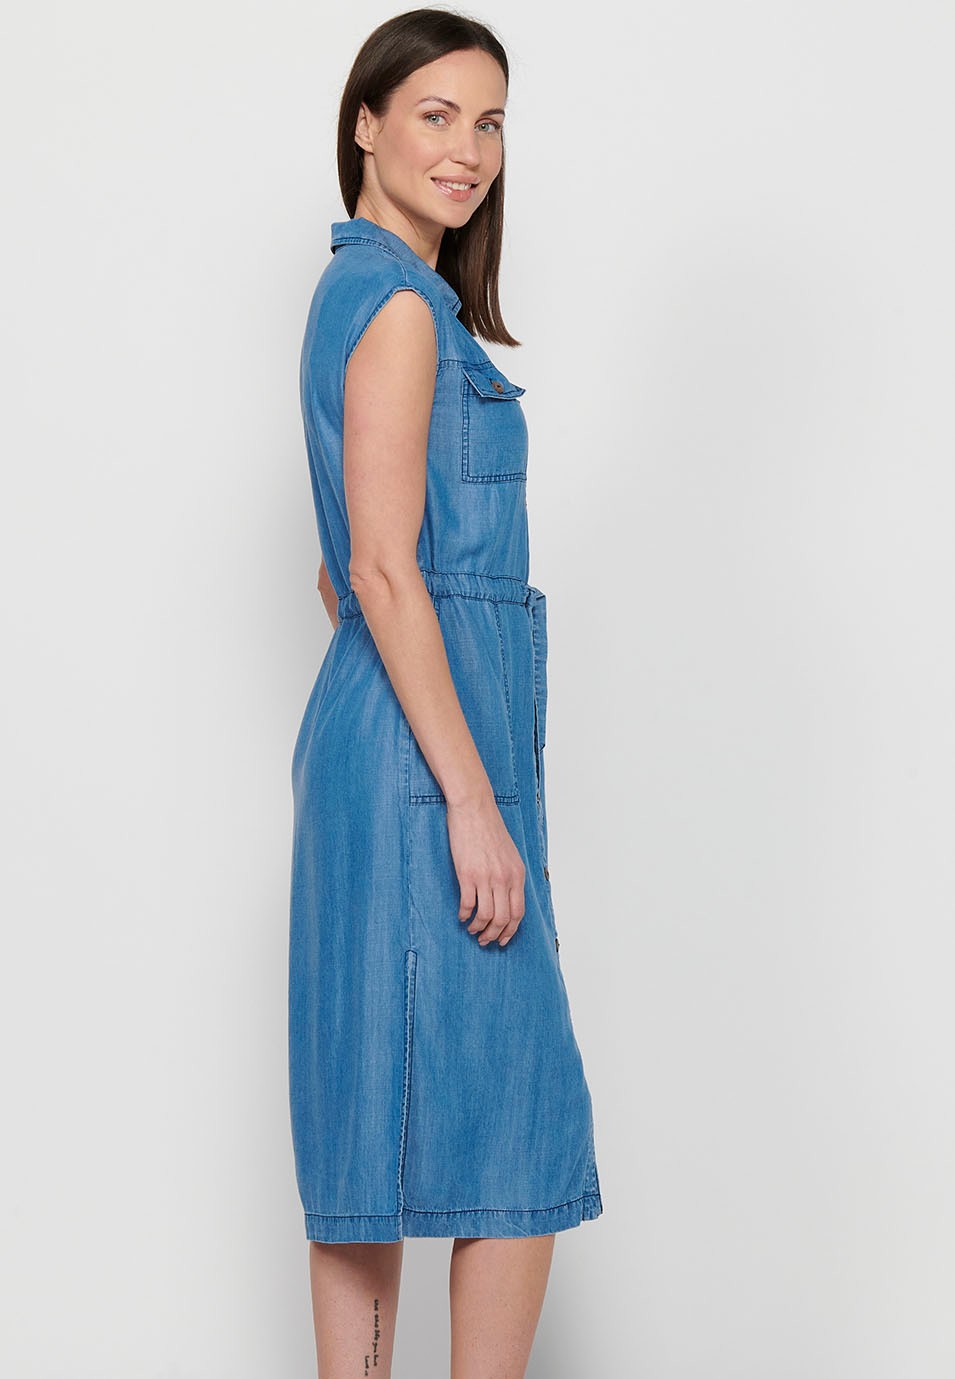 Women's Sleeveless Shirt Style Long Dress with Adjustable Waist with Drawstring and Button Front Closure in Blue 1